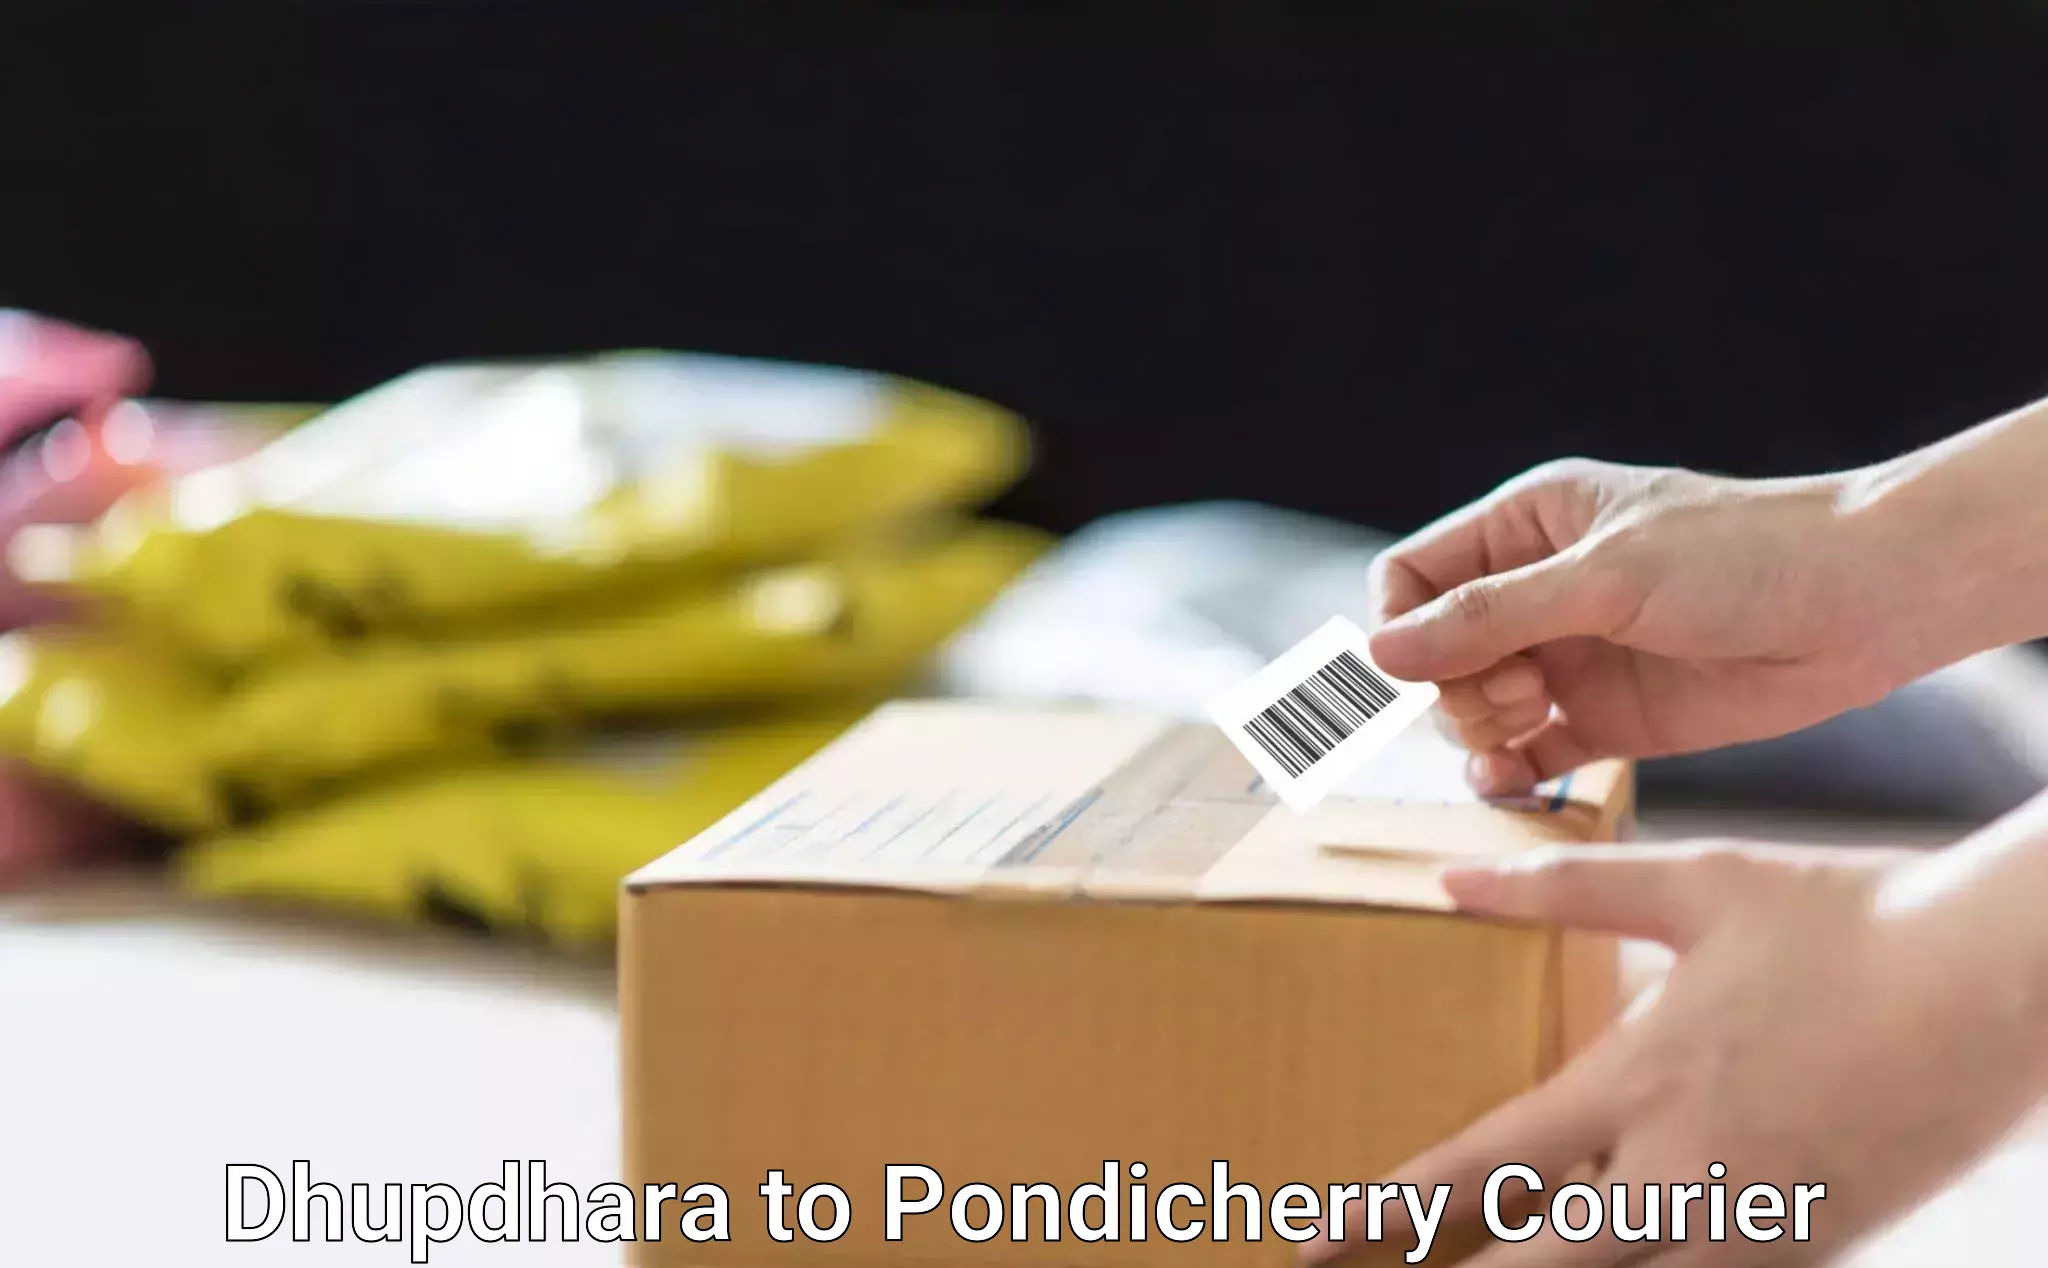 Reliable courier service Dhupdhara to Pondicherry University